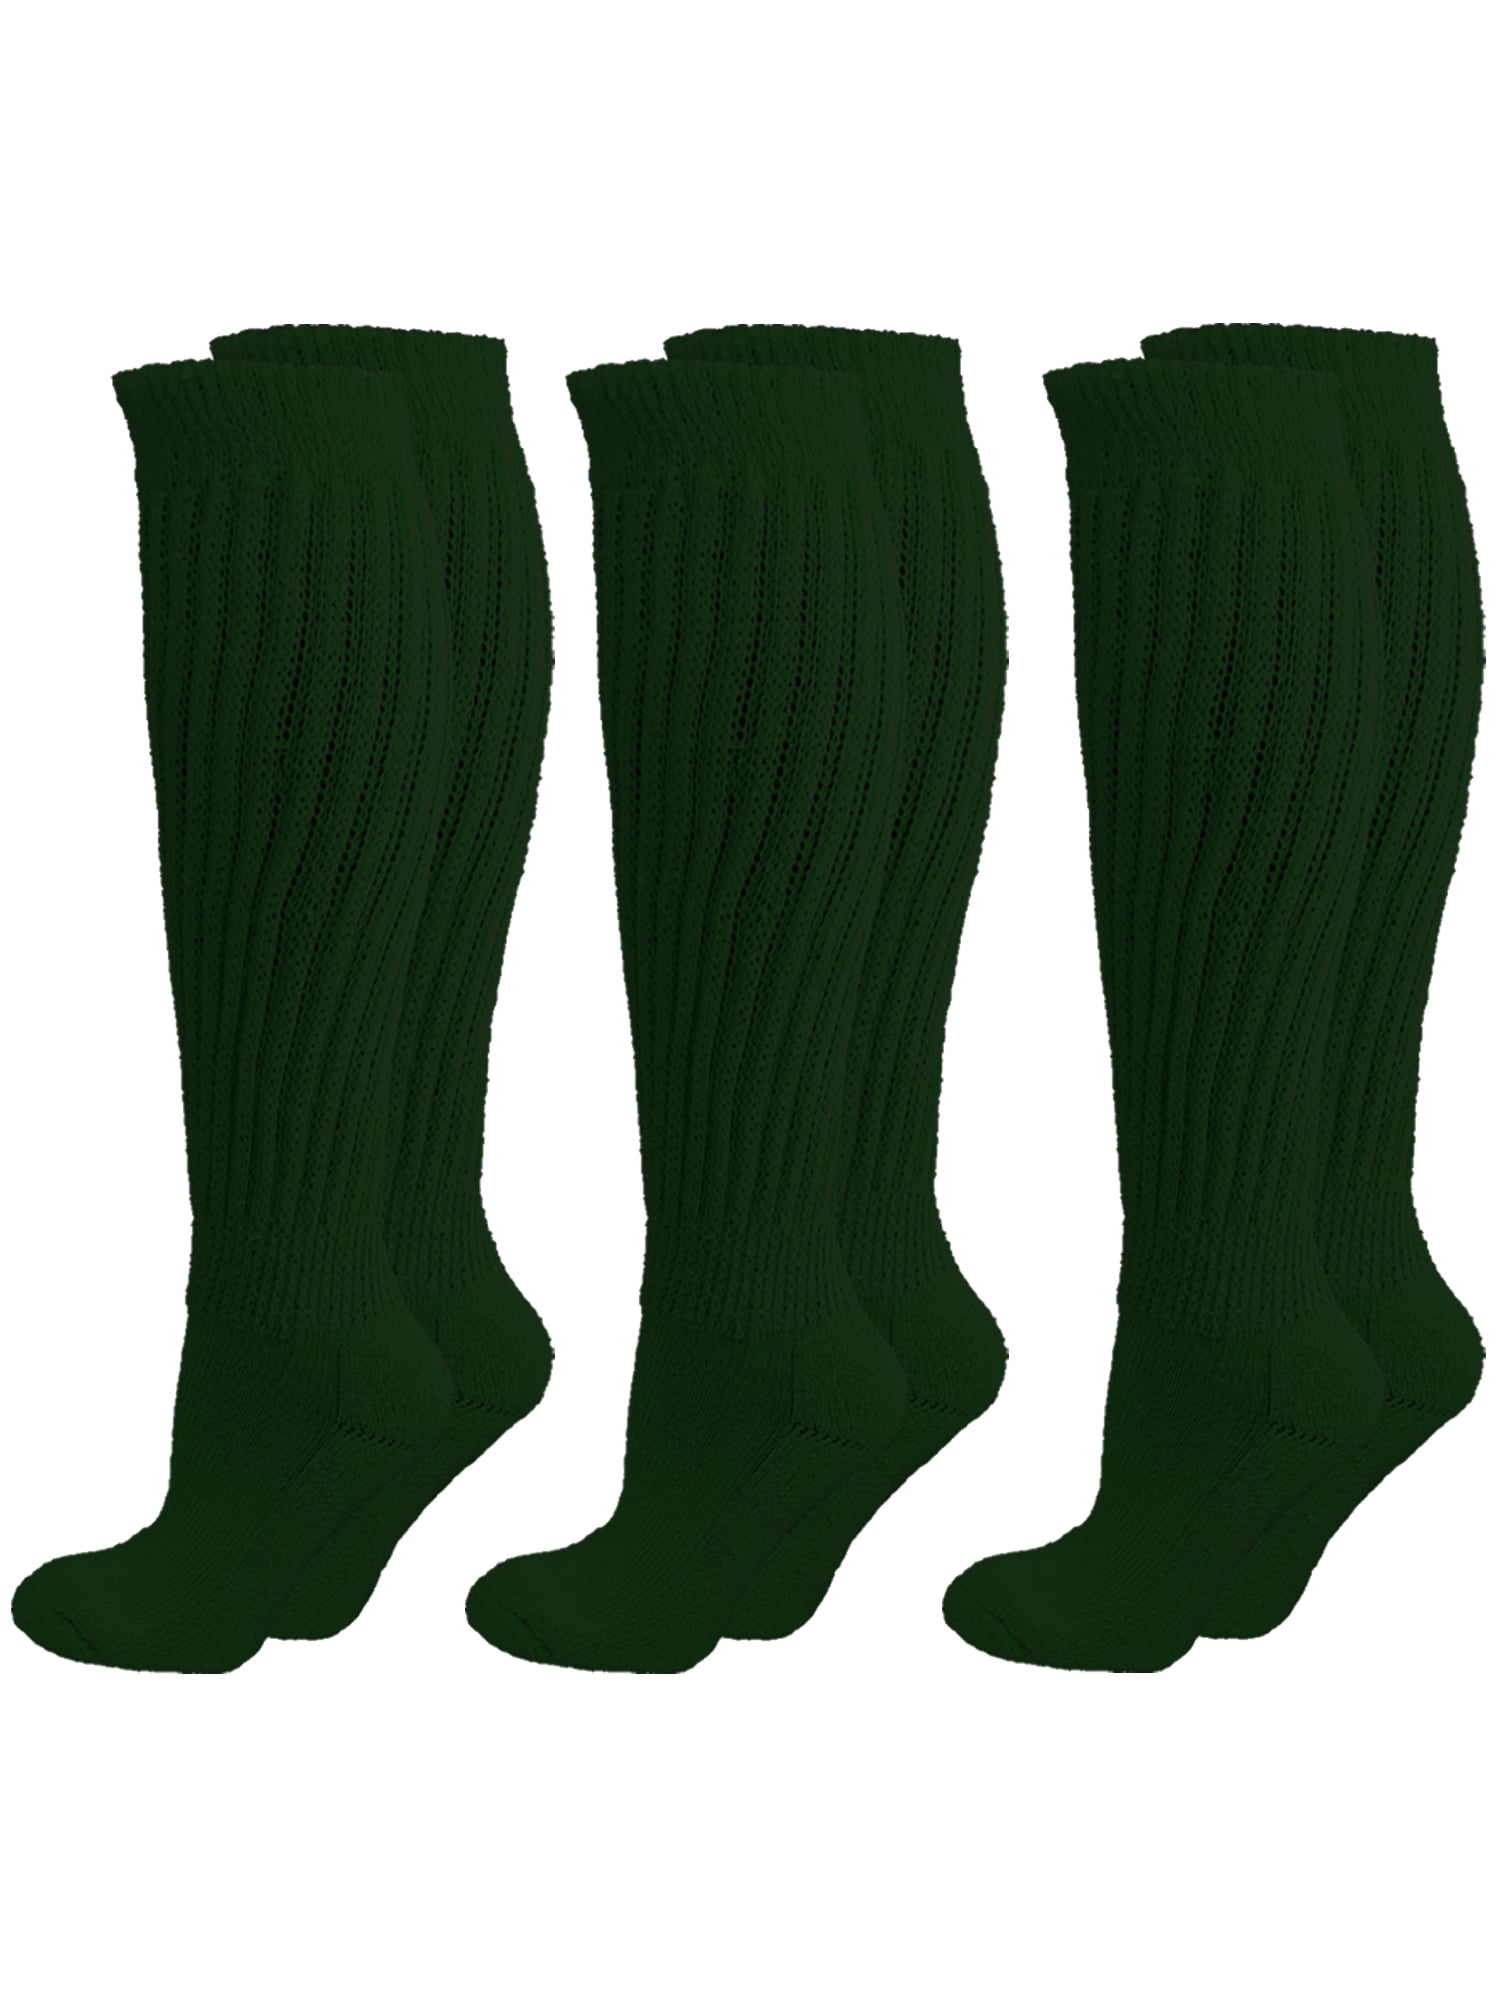 Kelly Green All Cotton 3 Pack Extra Heavy Slouch Socks Made In USA